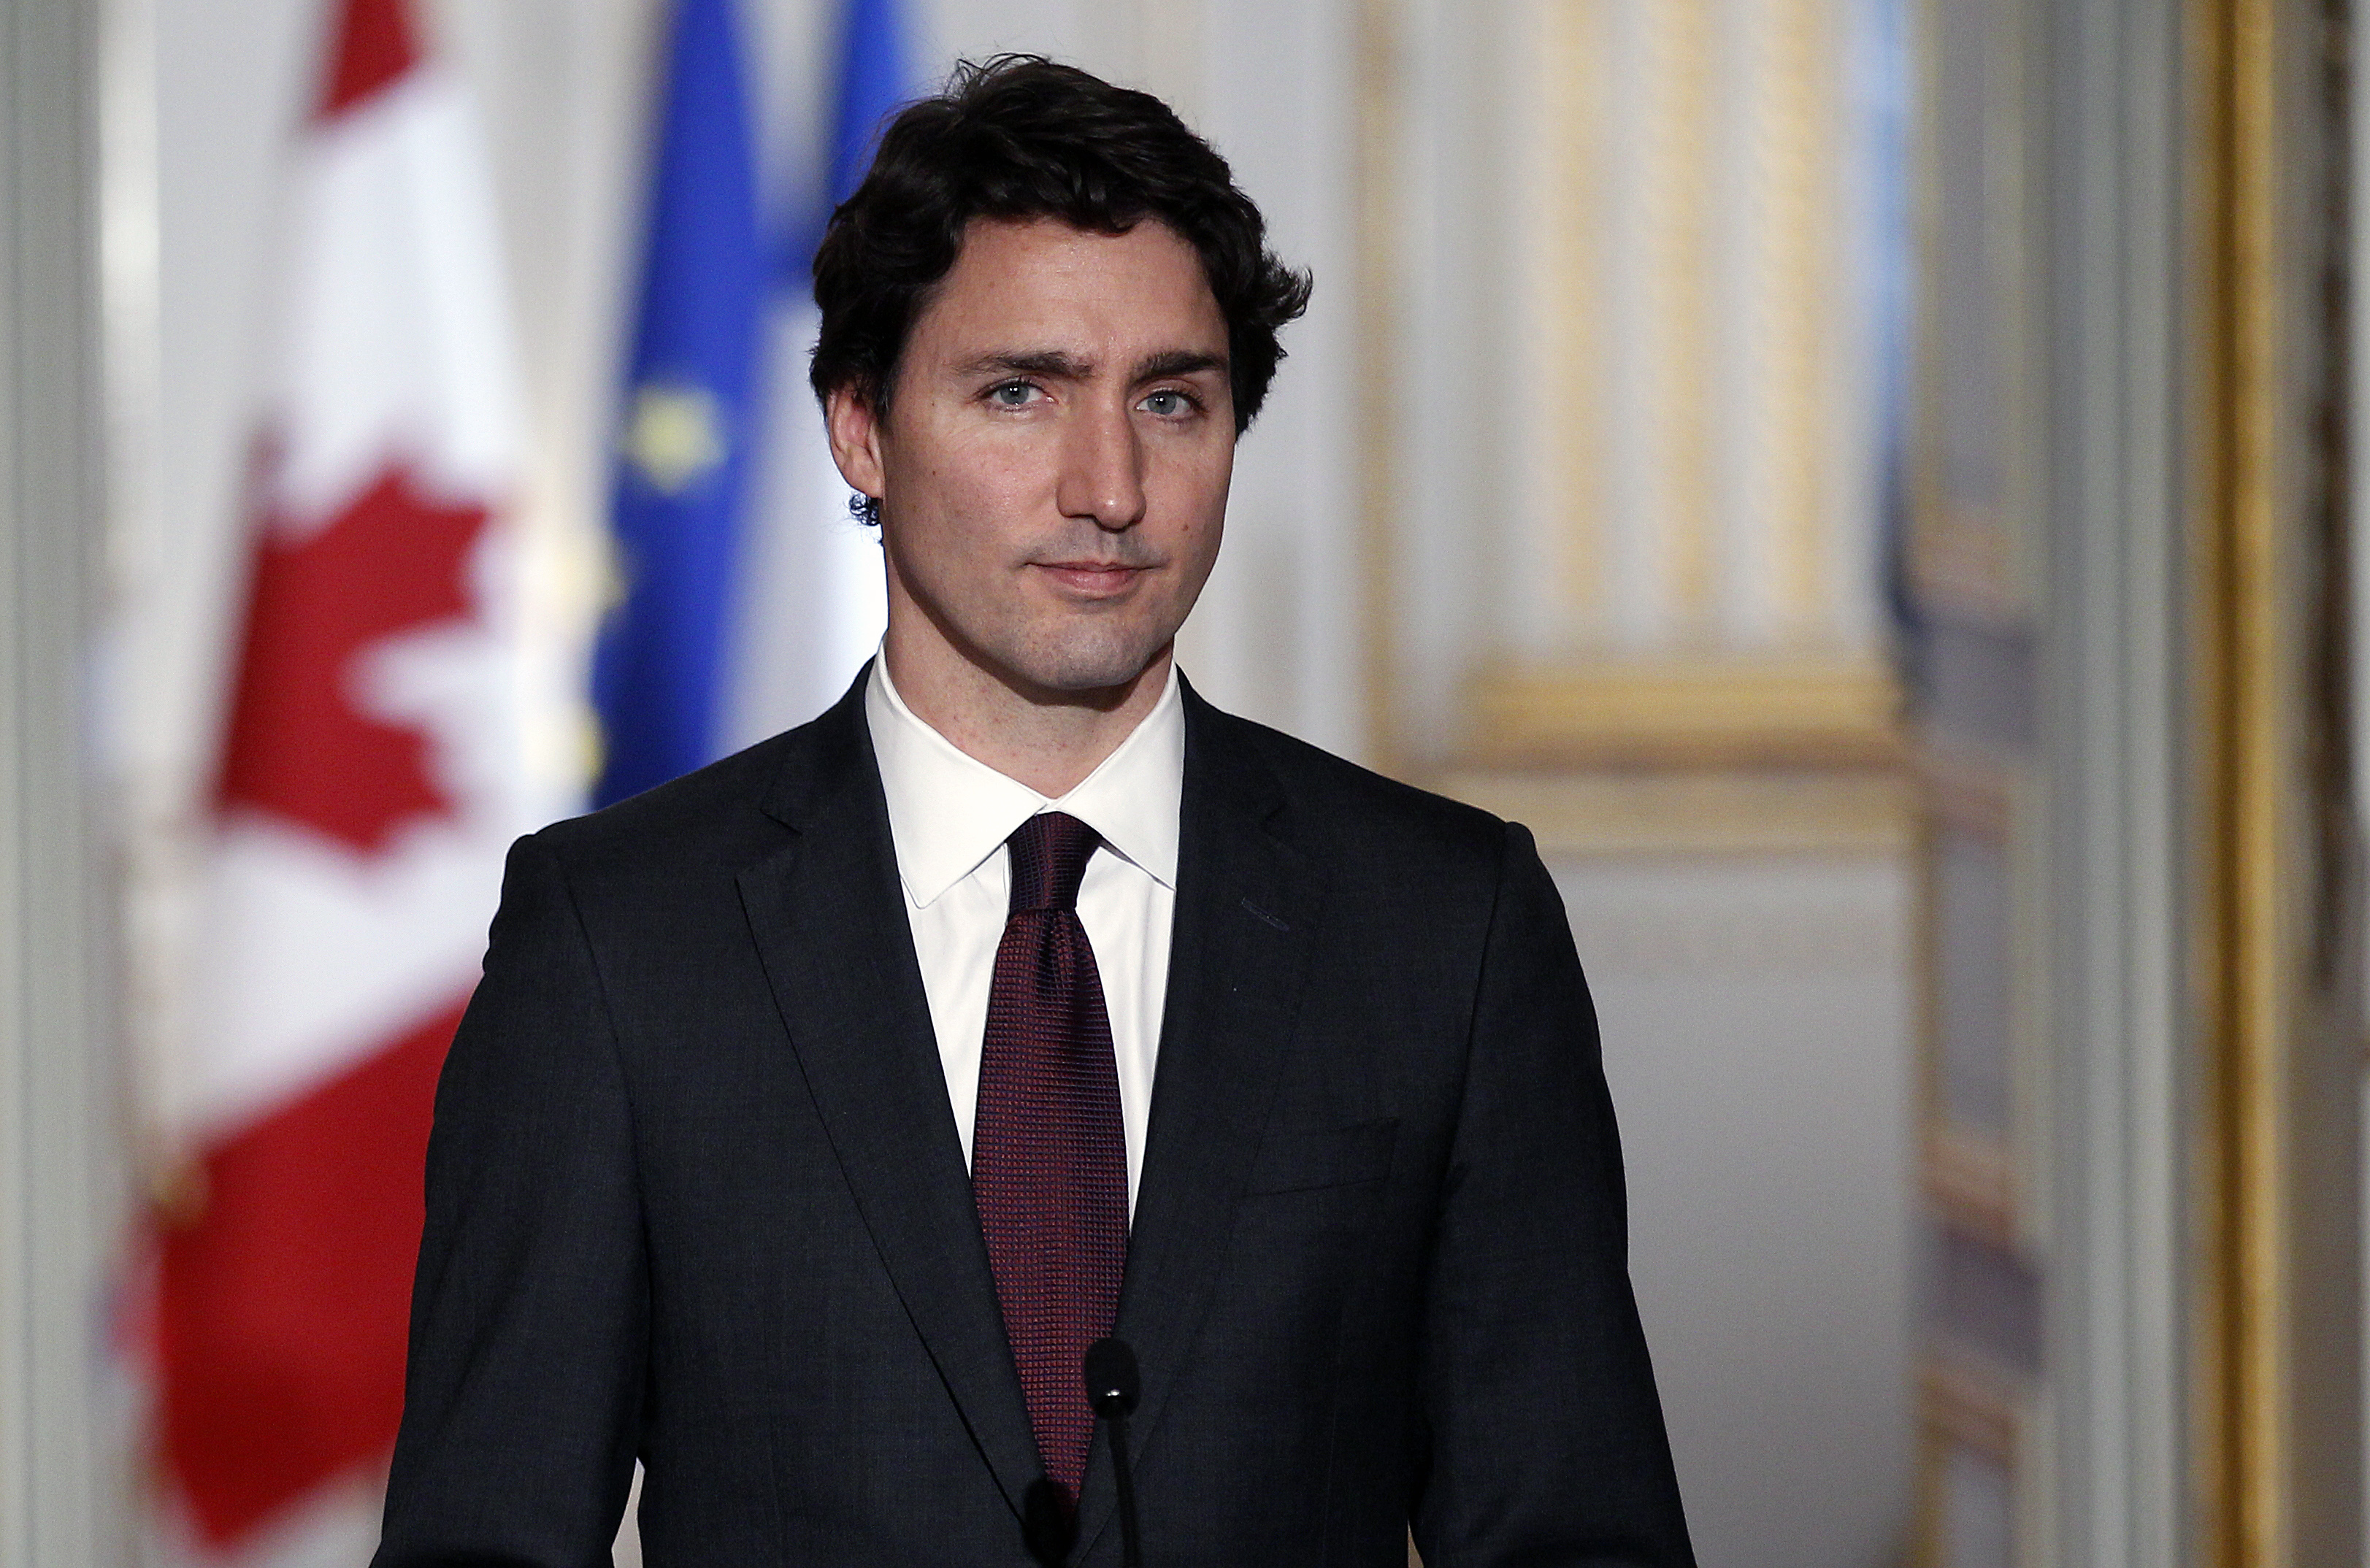 Justin Trudeau makes a statement during a press conference at the Elysee Presidential Palace on Nov. 29, 2015 in Paris, France. (Chesnot—Getty Images)